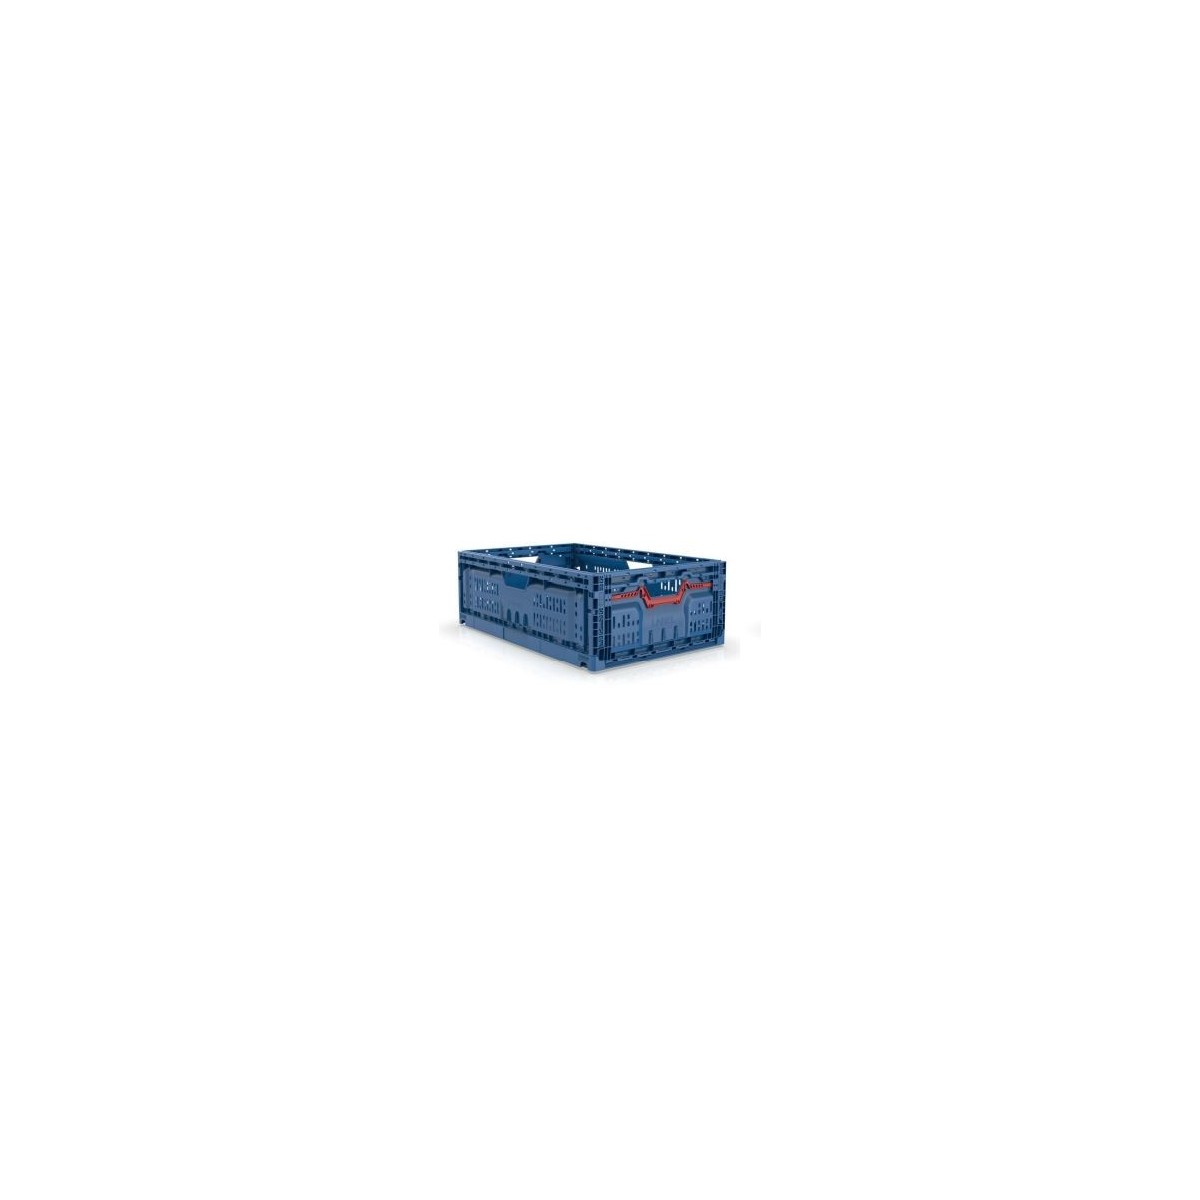 FOLDING CONTAINER EURONORM 60X40X20CM BLUE PERFORATED VOLUME 40L